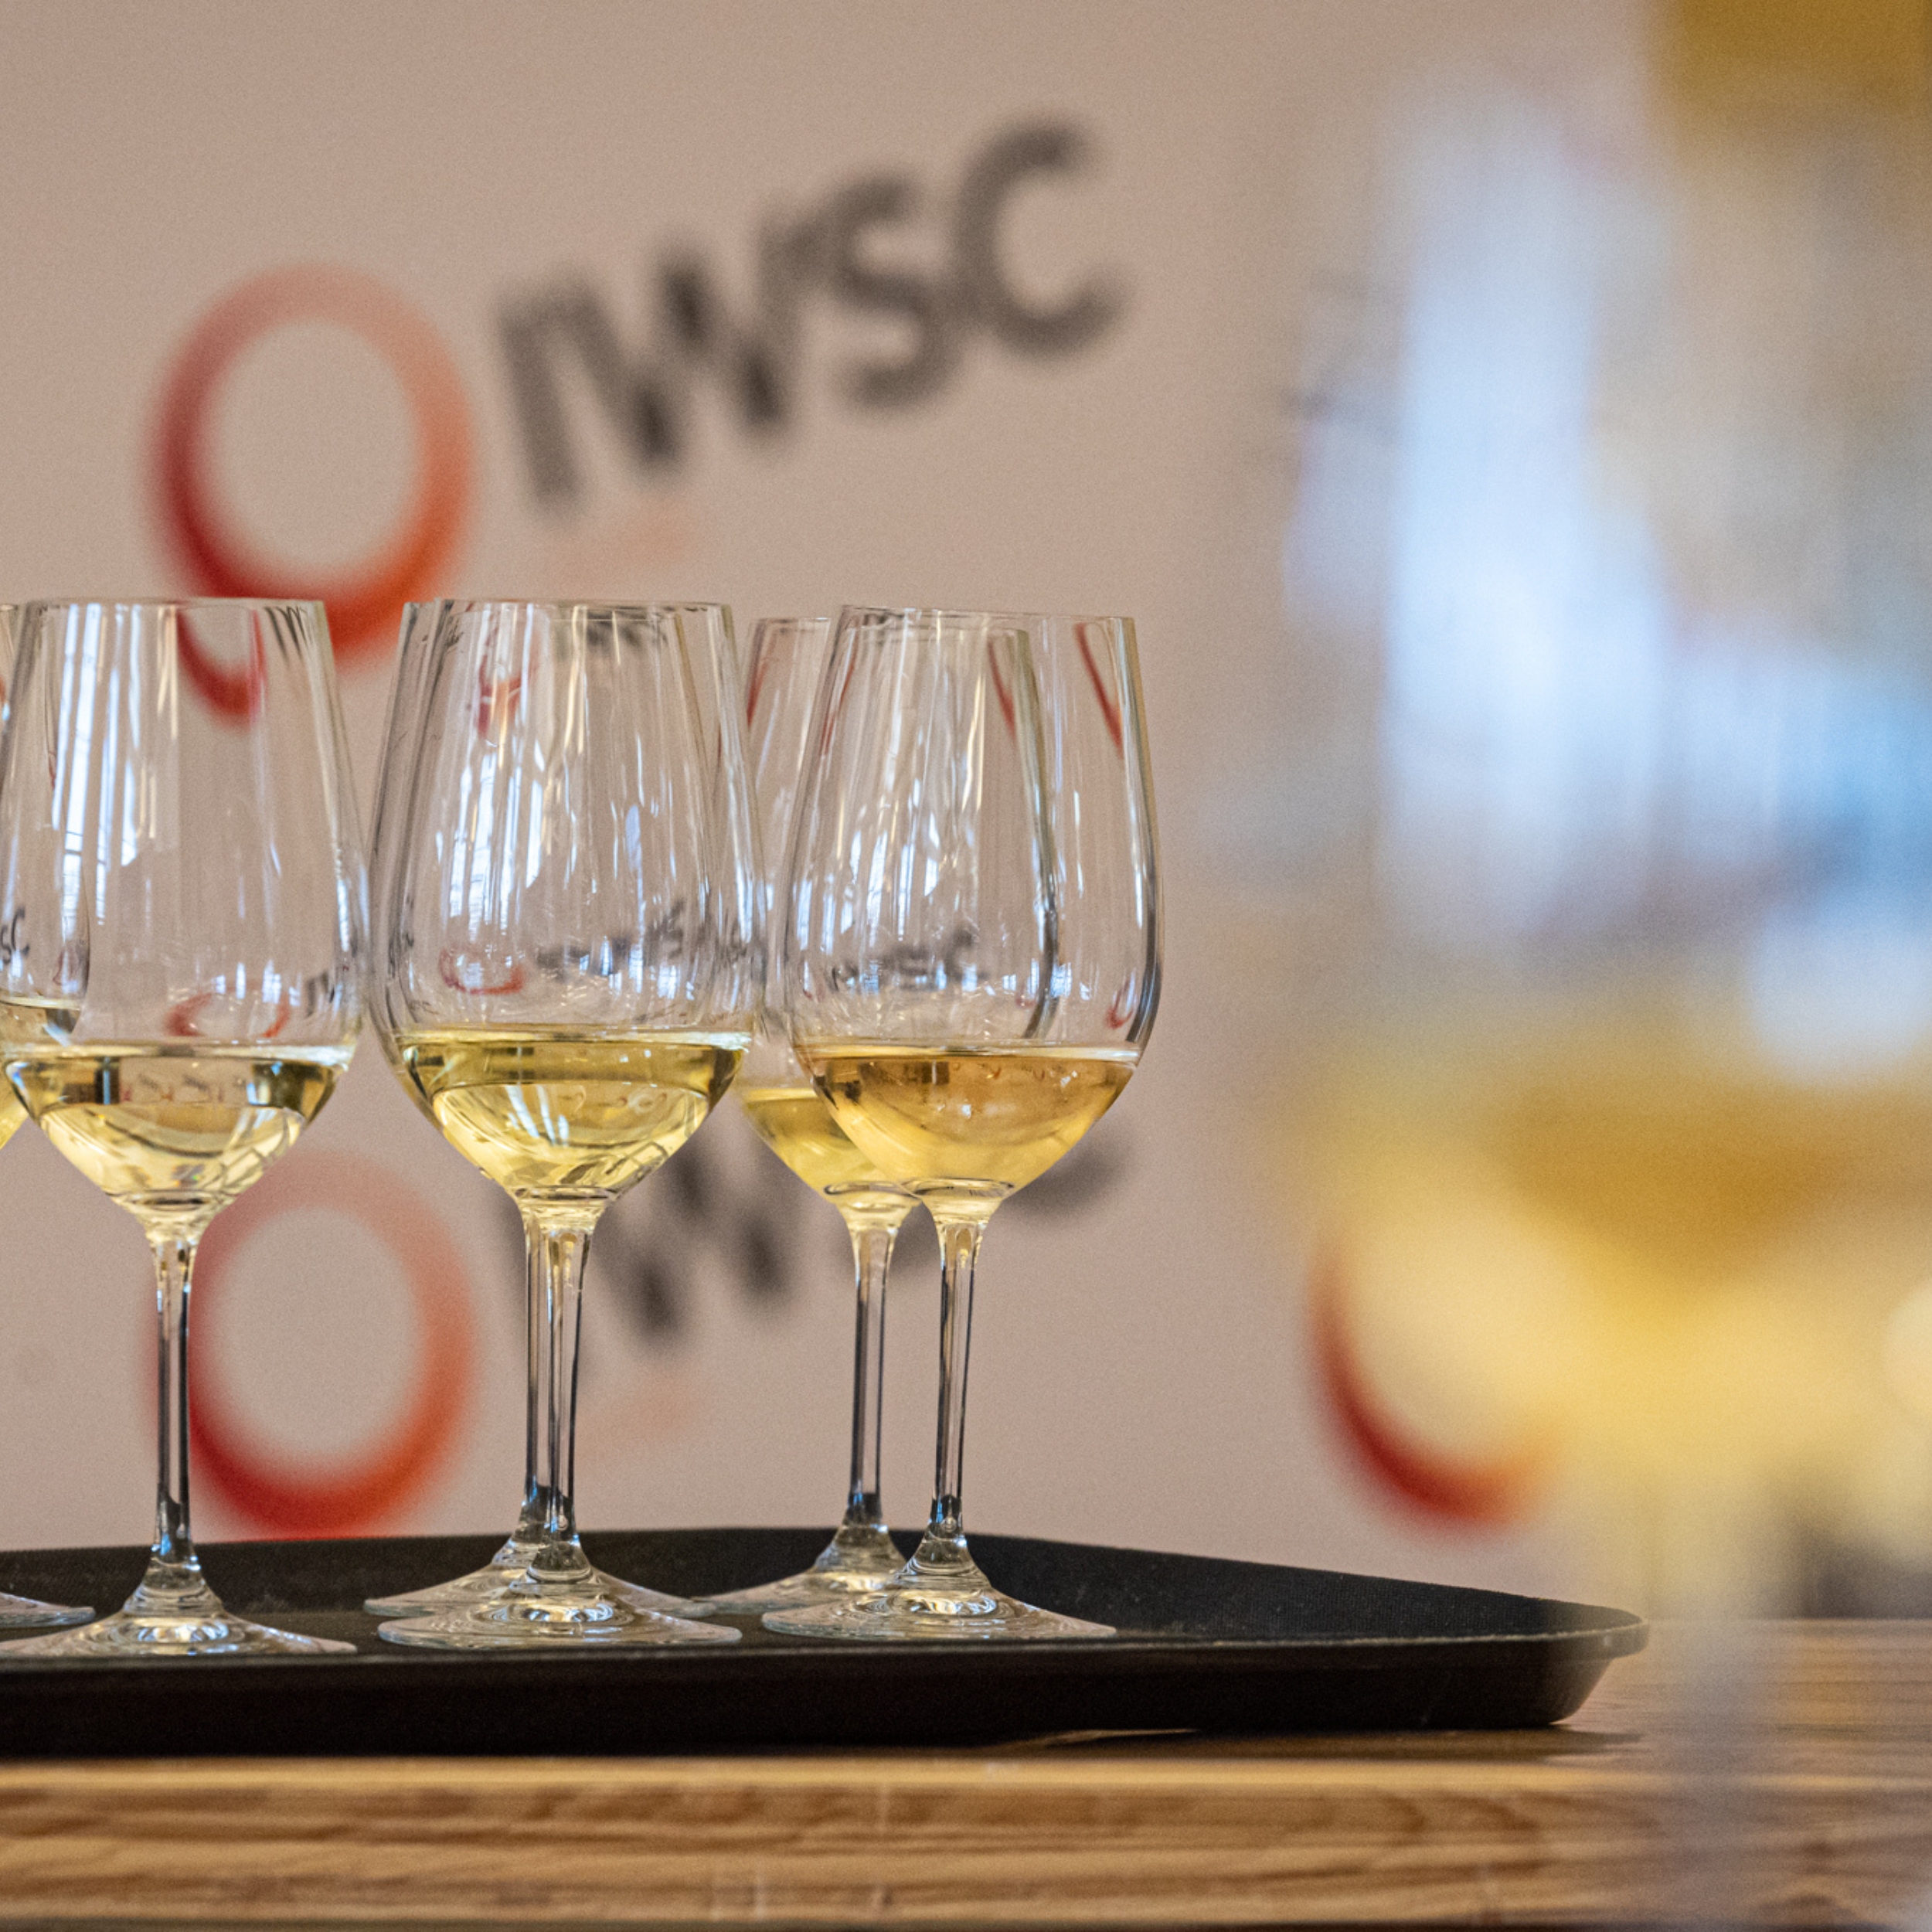 About the IWSC